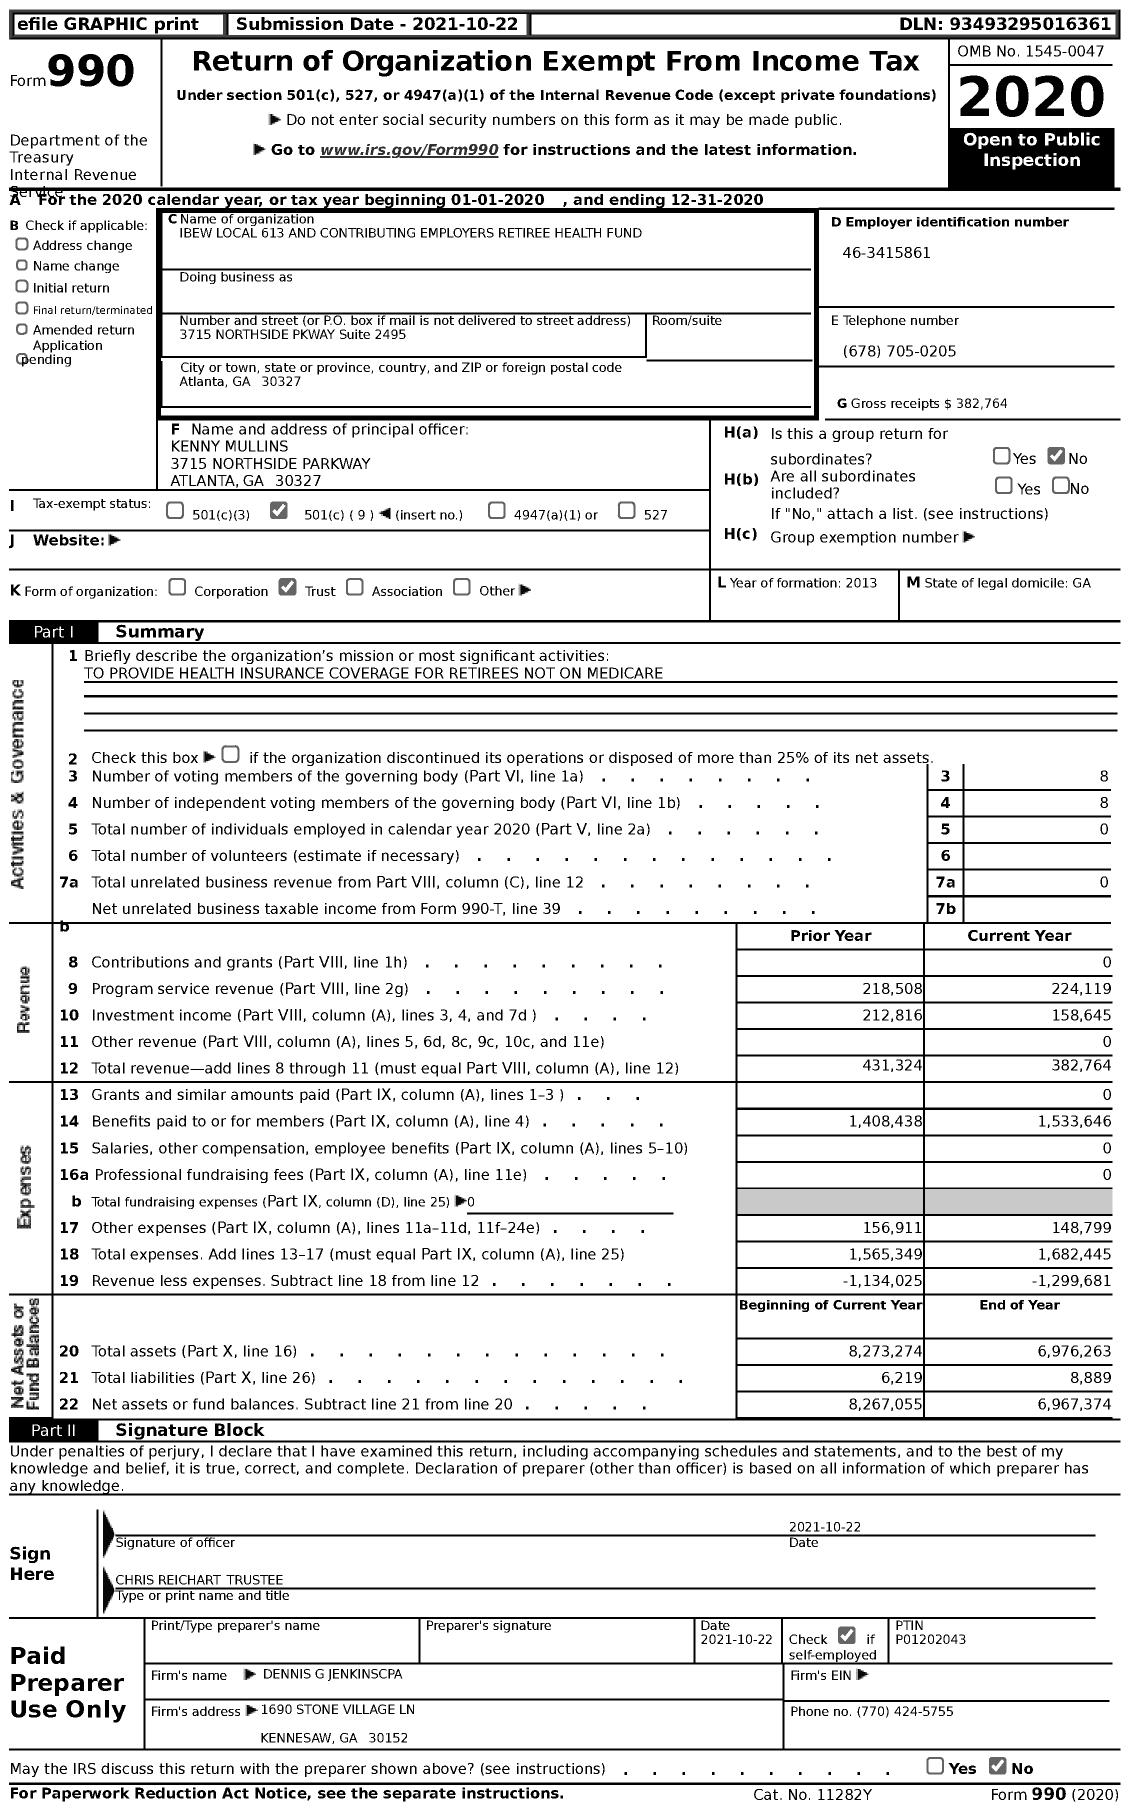 Image of first page of 2020 Form 990 for IBEW Local 613 and Contributing Employers Retiree Health Fund